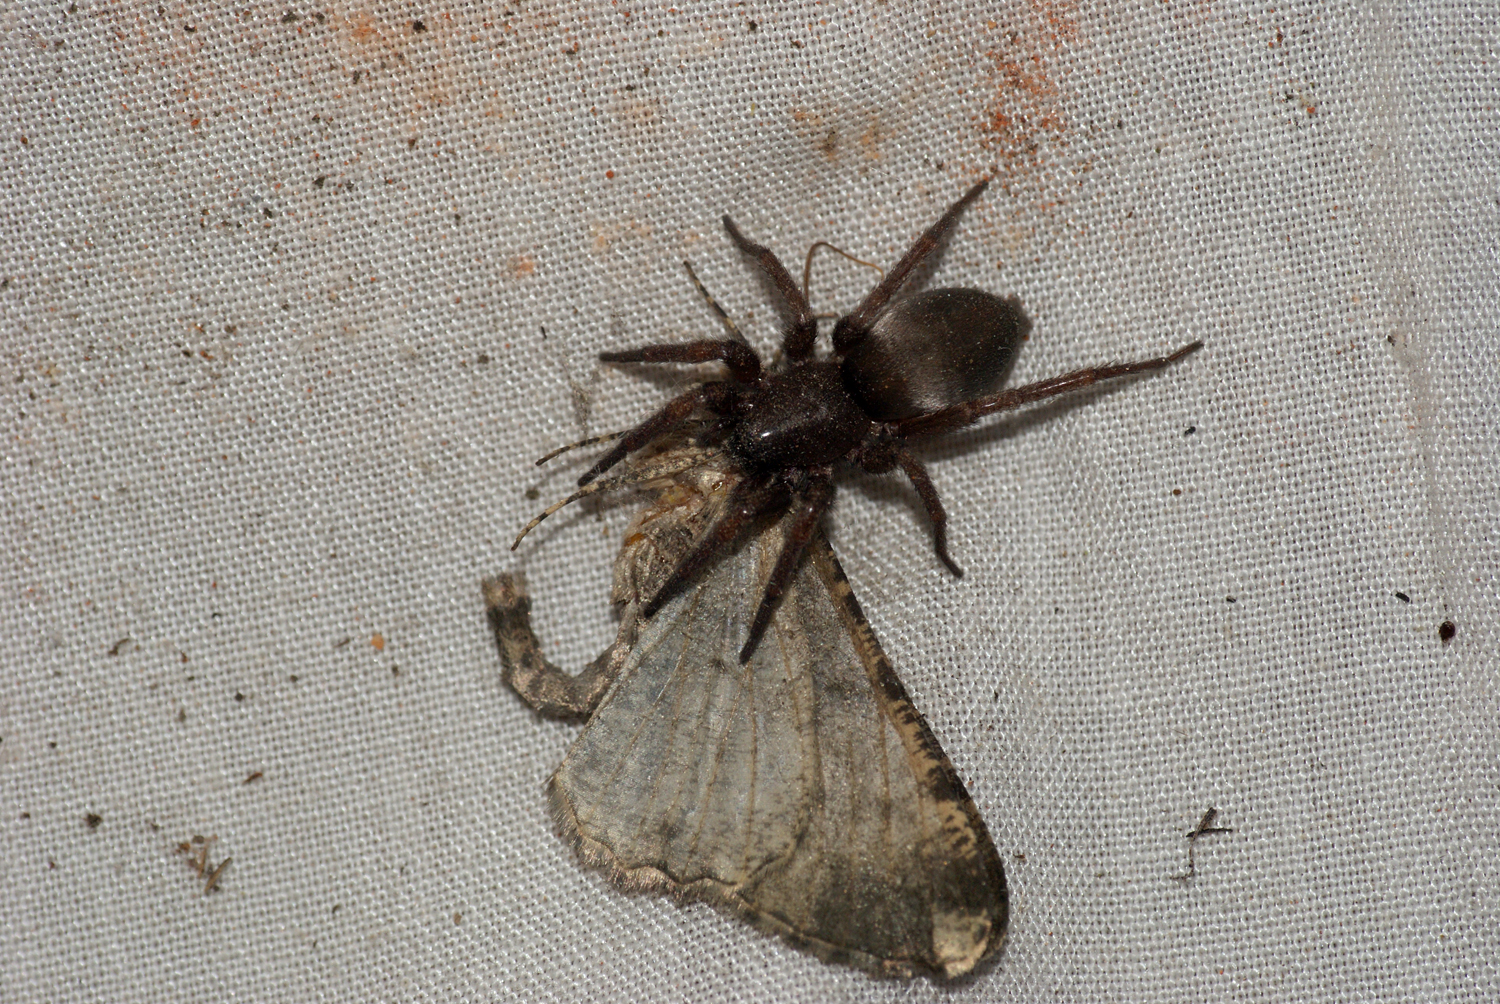 a very pretty brown and black spider on the cloth